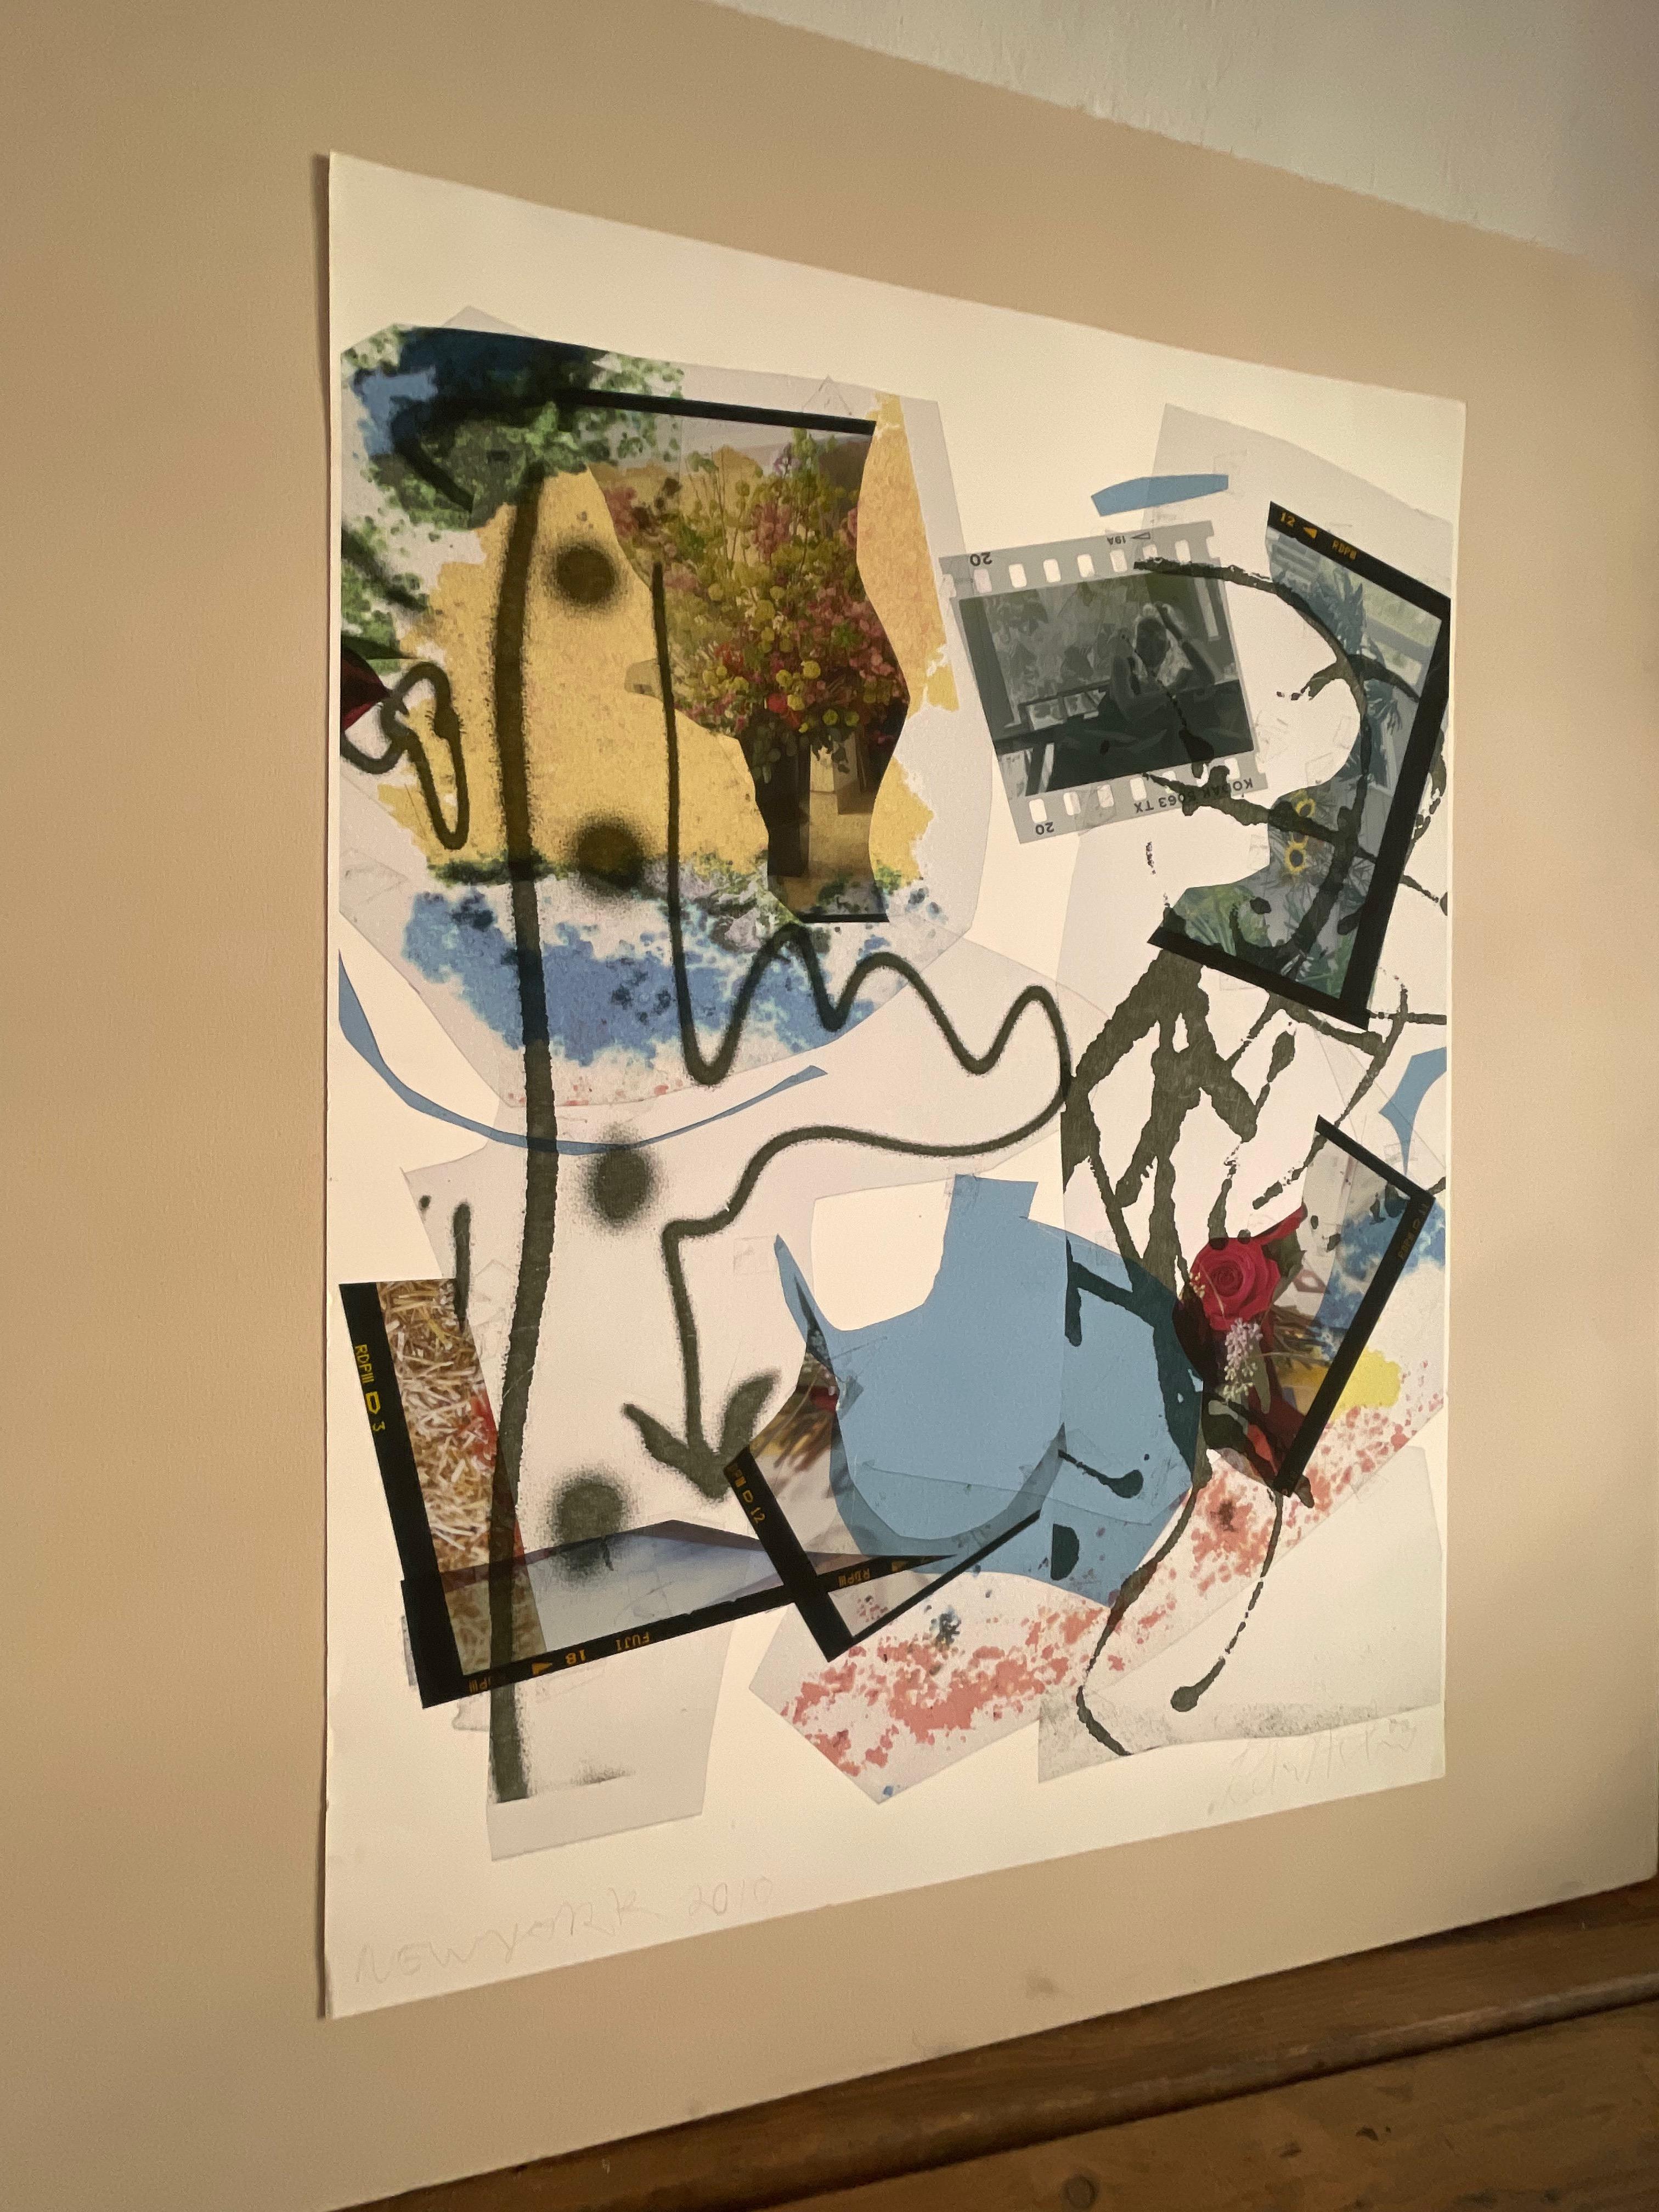 ”Summer Flowers”, abstract expressionist photo collage print by Swedish artist Peter Astrom. Signed Astrom at bottom right margin, and New York 2010 bottom left. Dimensions: H 48” x W 36 ‘.